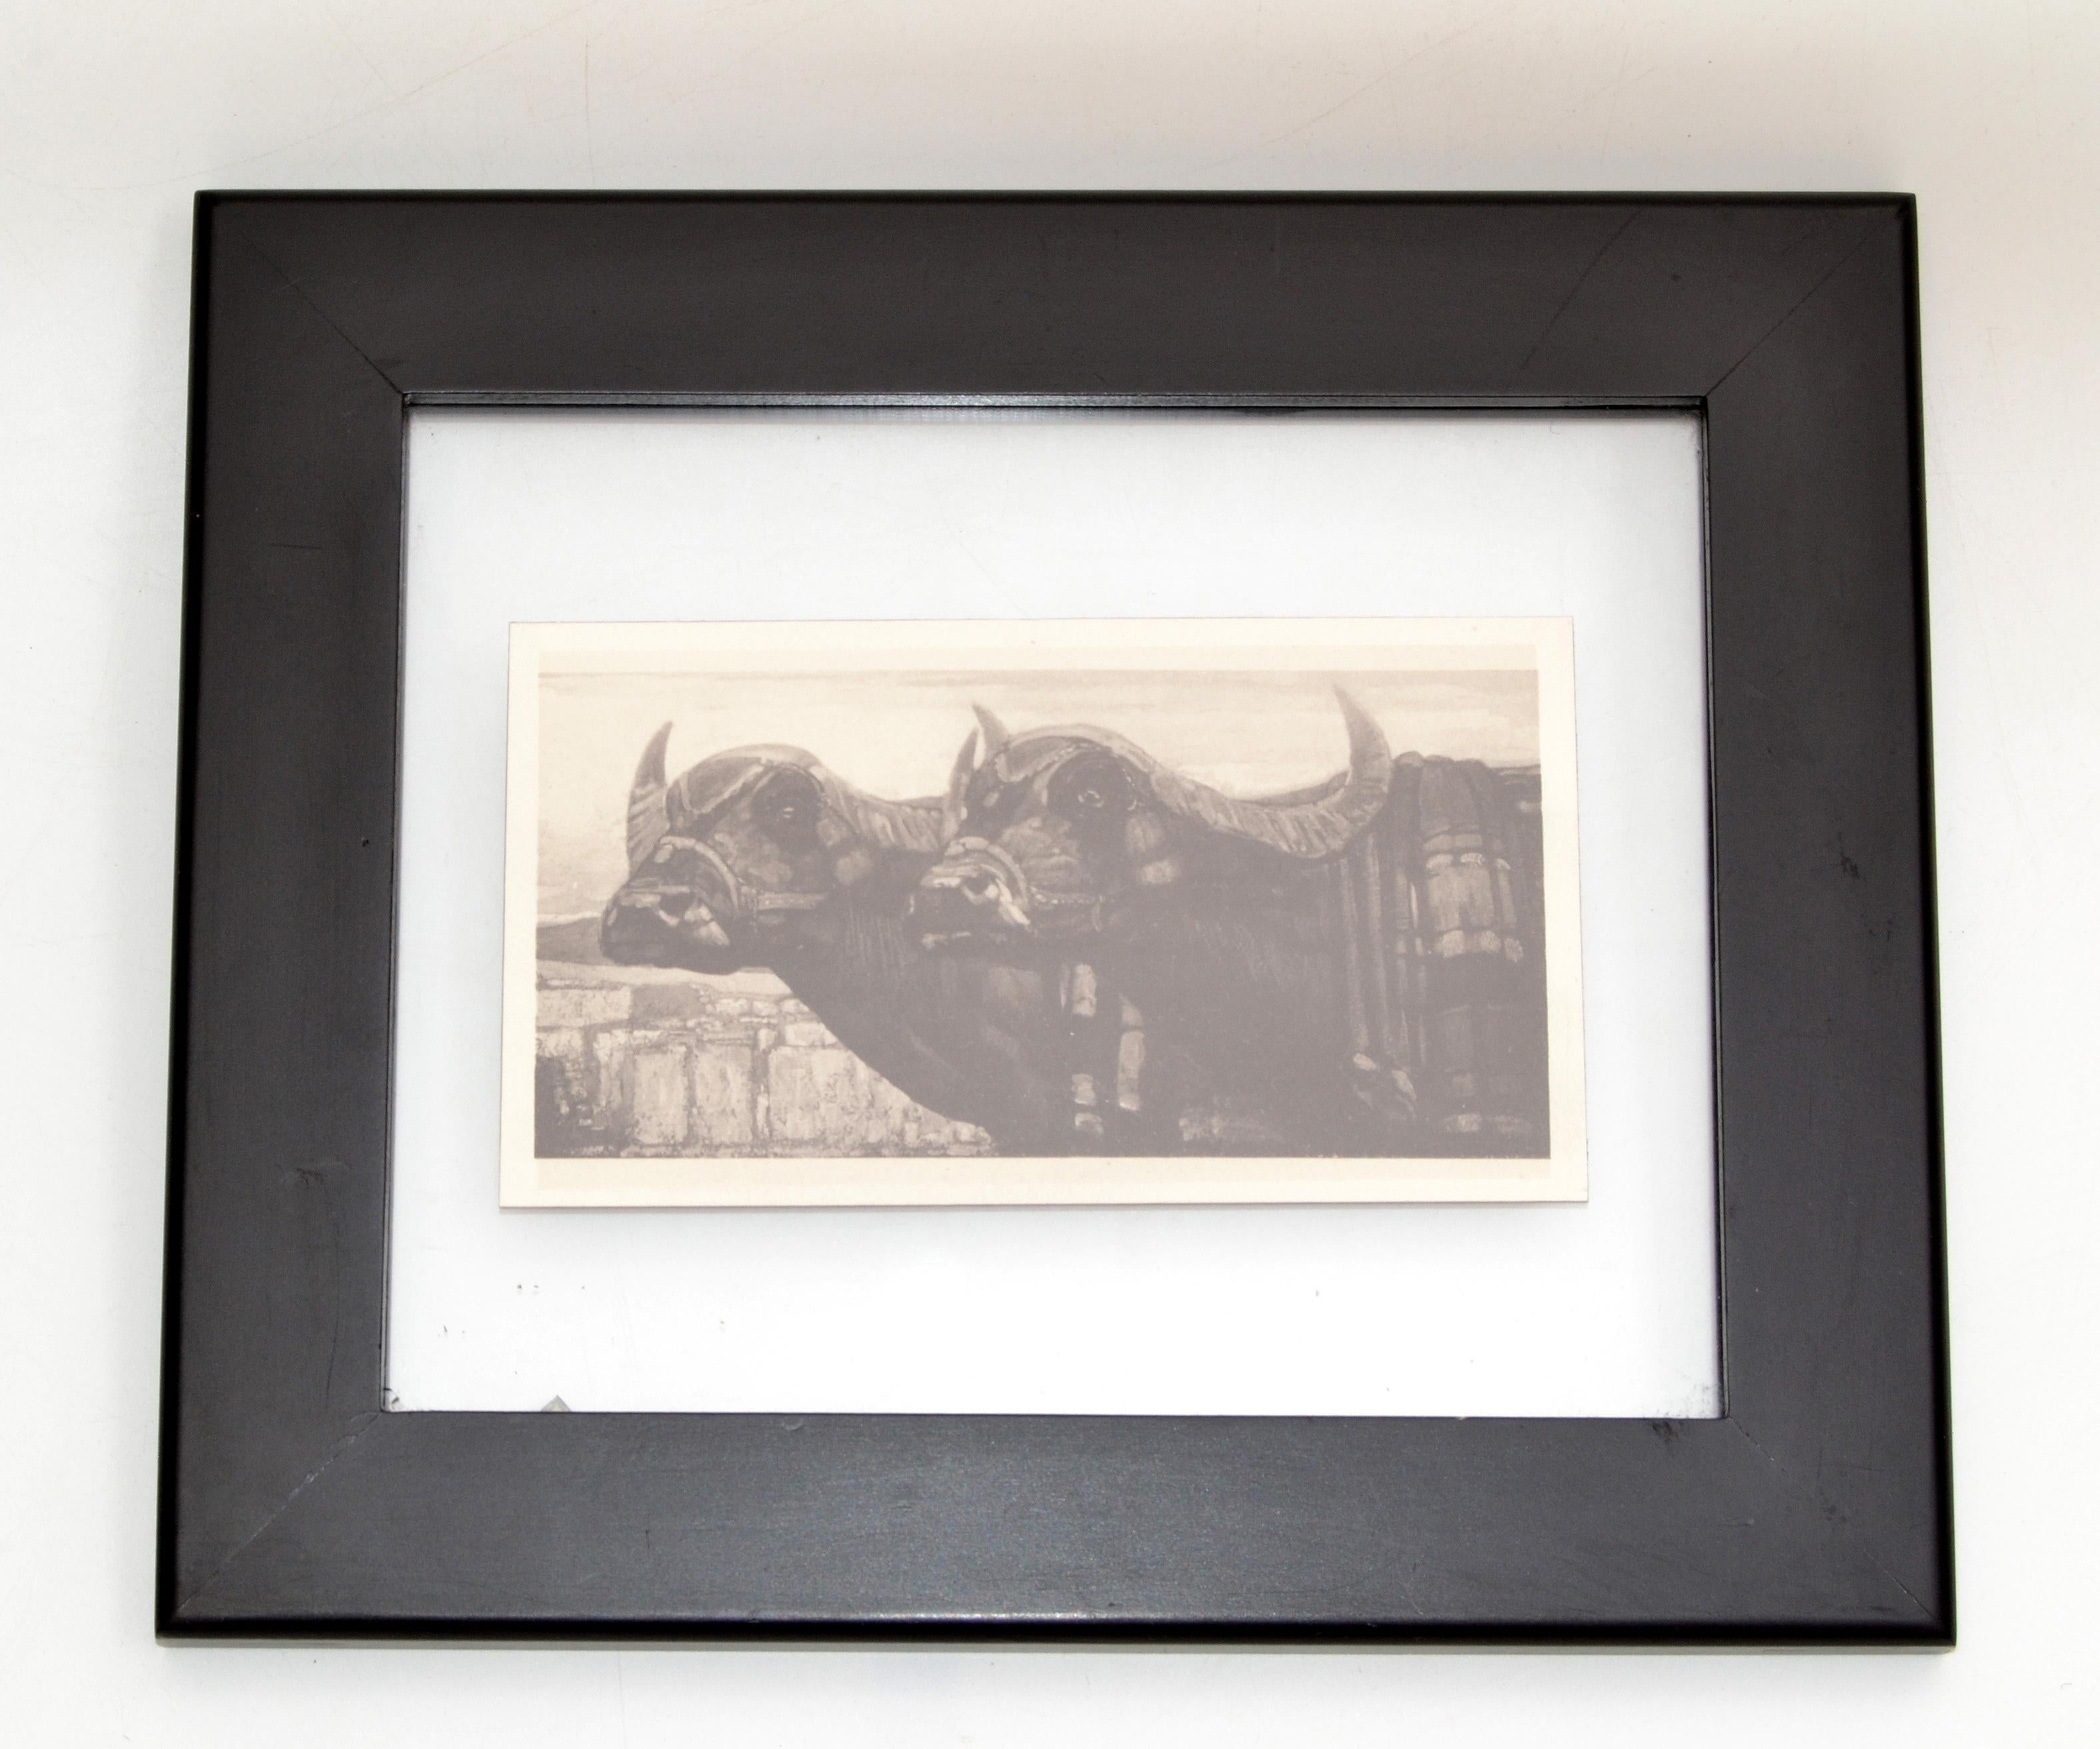 Vintage black wood framed sketch of two cows, from the Book Peinture et Dessins de Paul Jouve.
Dated circa 1930. Not an original Paul Jouve drawing.
Sketch size: 7.75 x 4.38 inches.
Jouve visited zoos all over the world, observing lions, tigers,